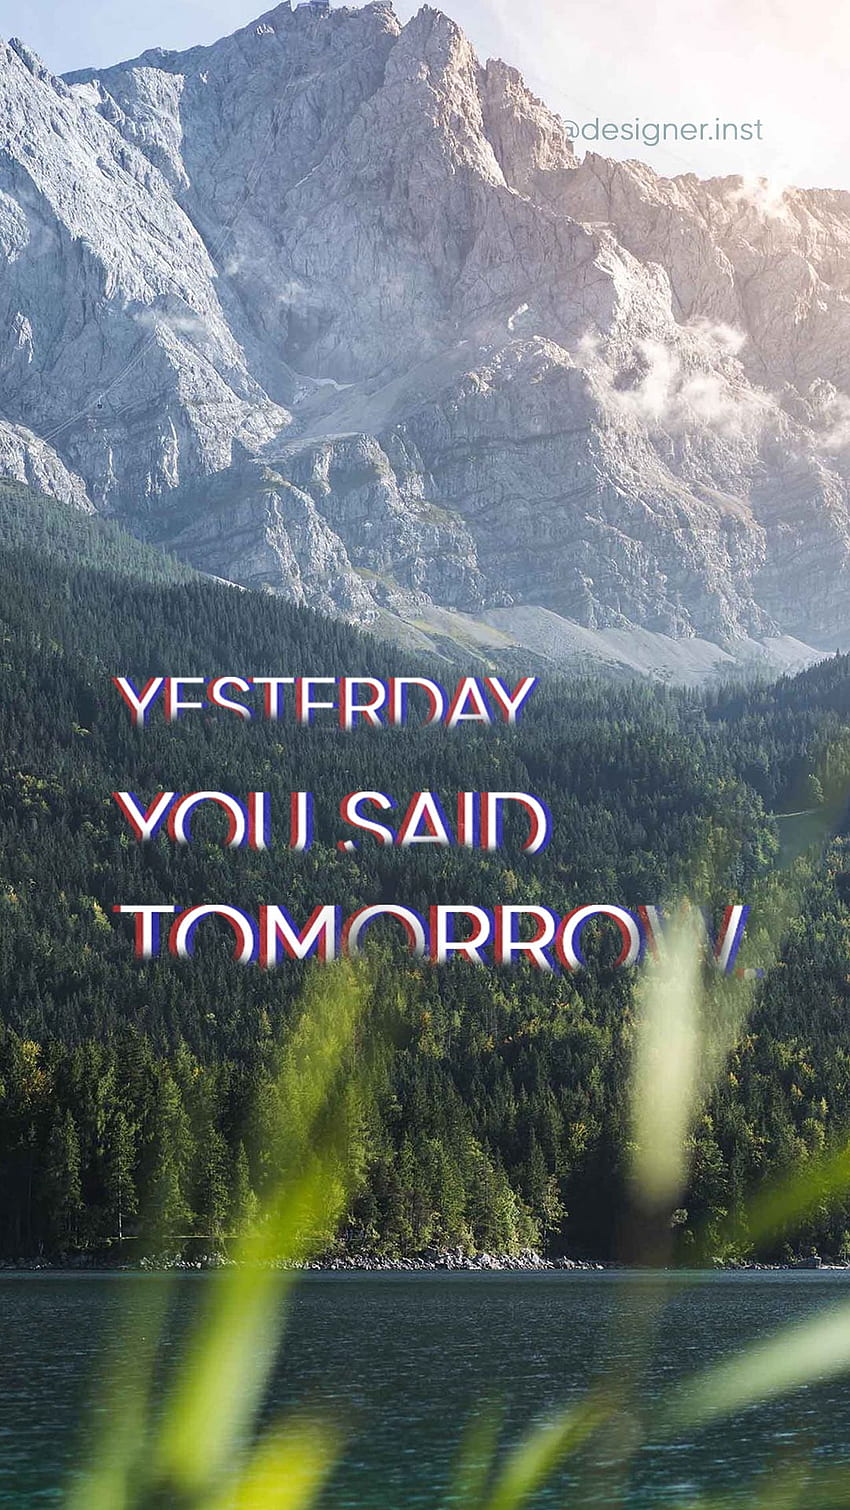 Yesterday you said tomorrow - Motivational iPhone, Always Tomorrow iPhone HD phone wallpaper